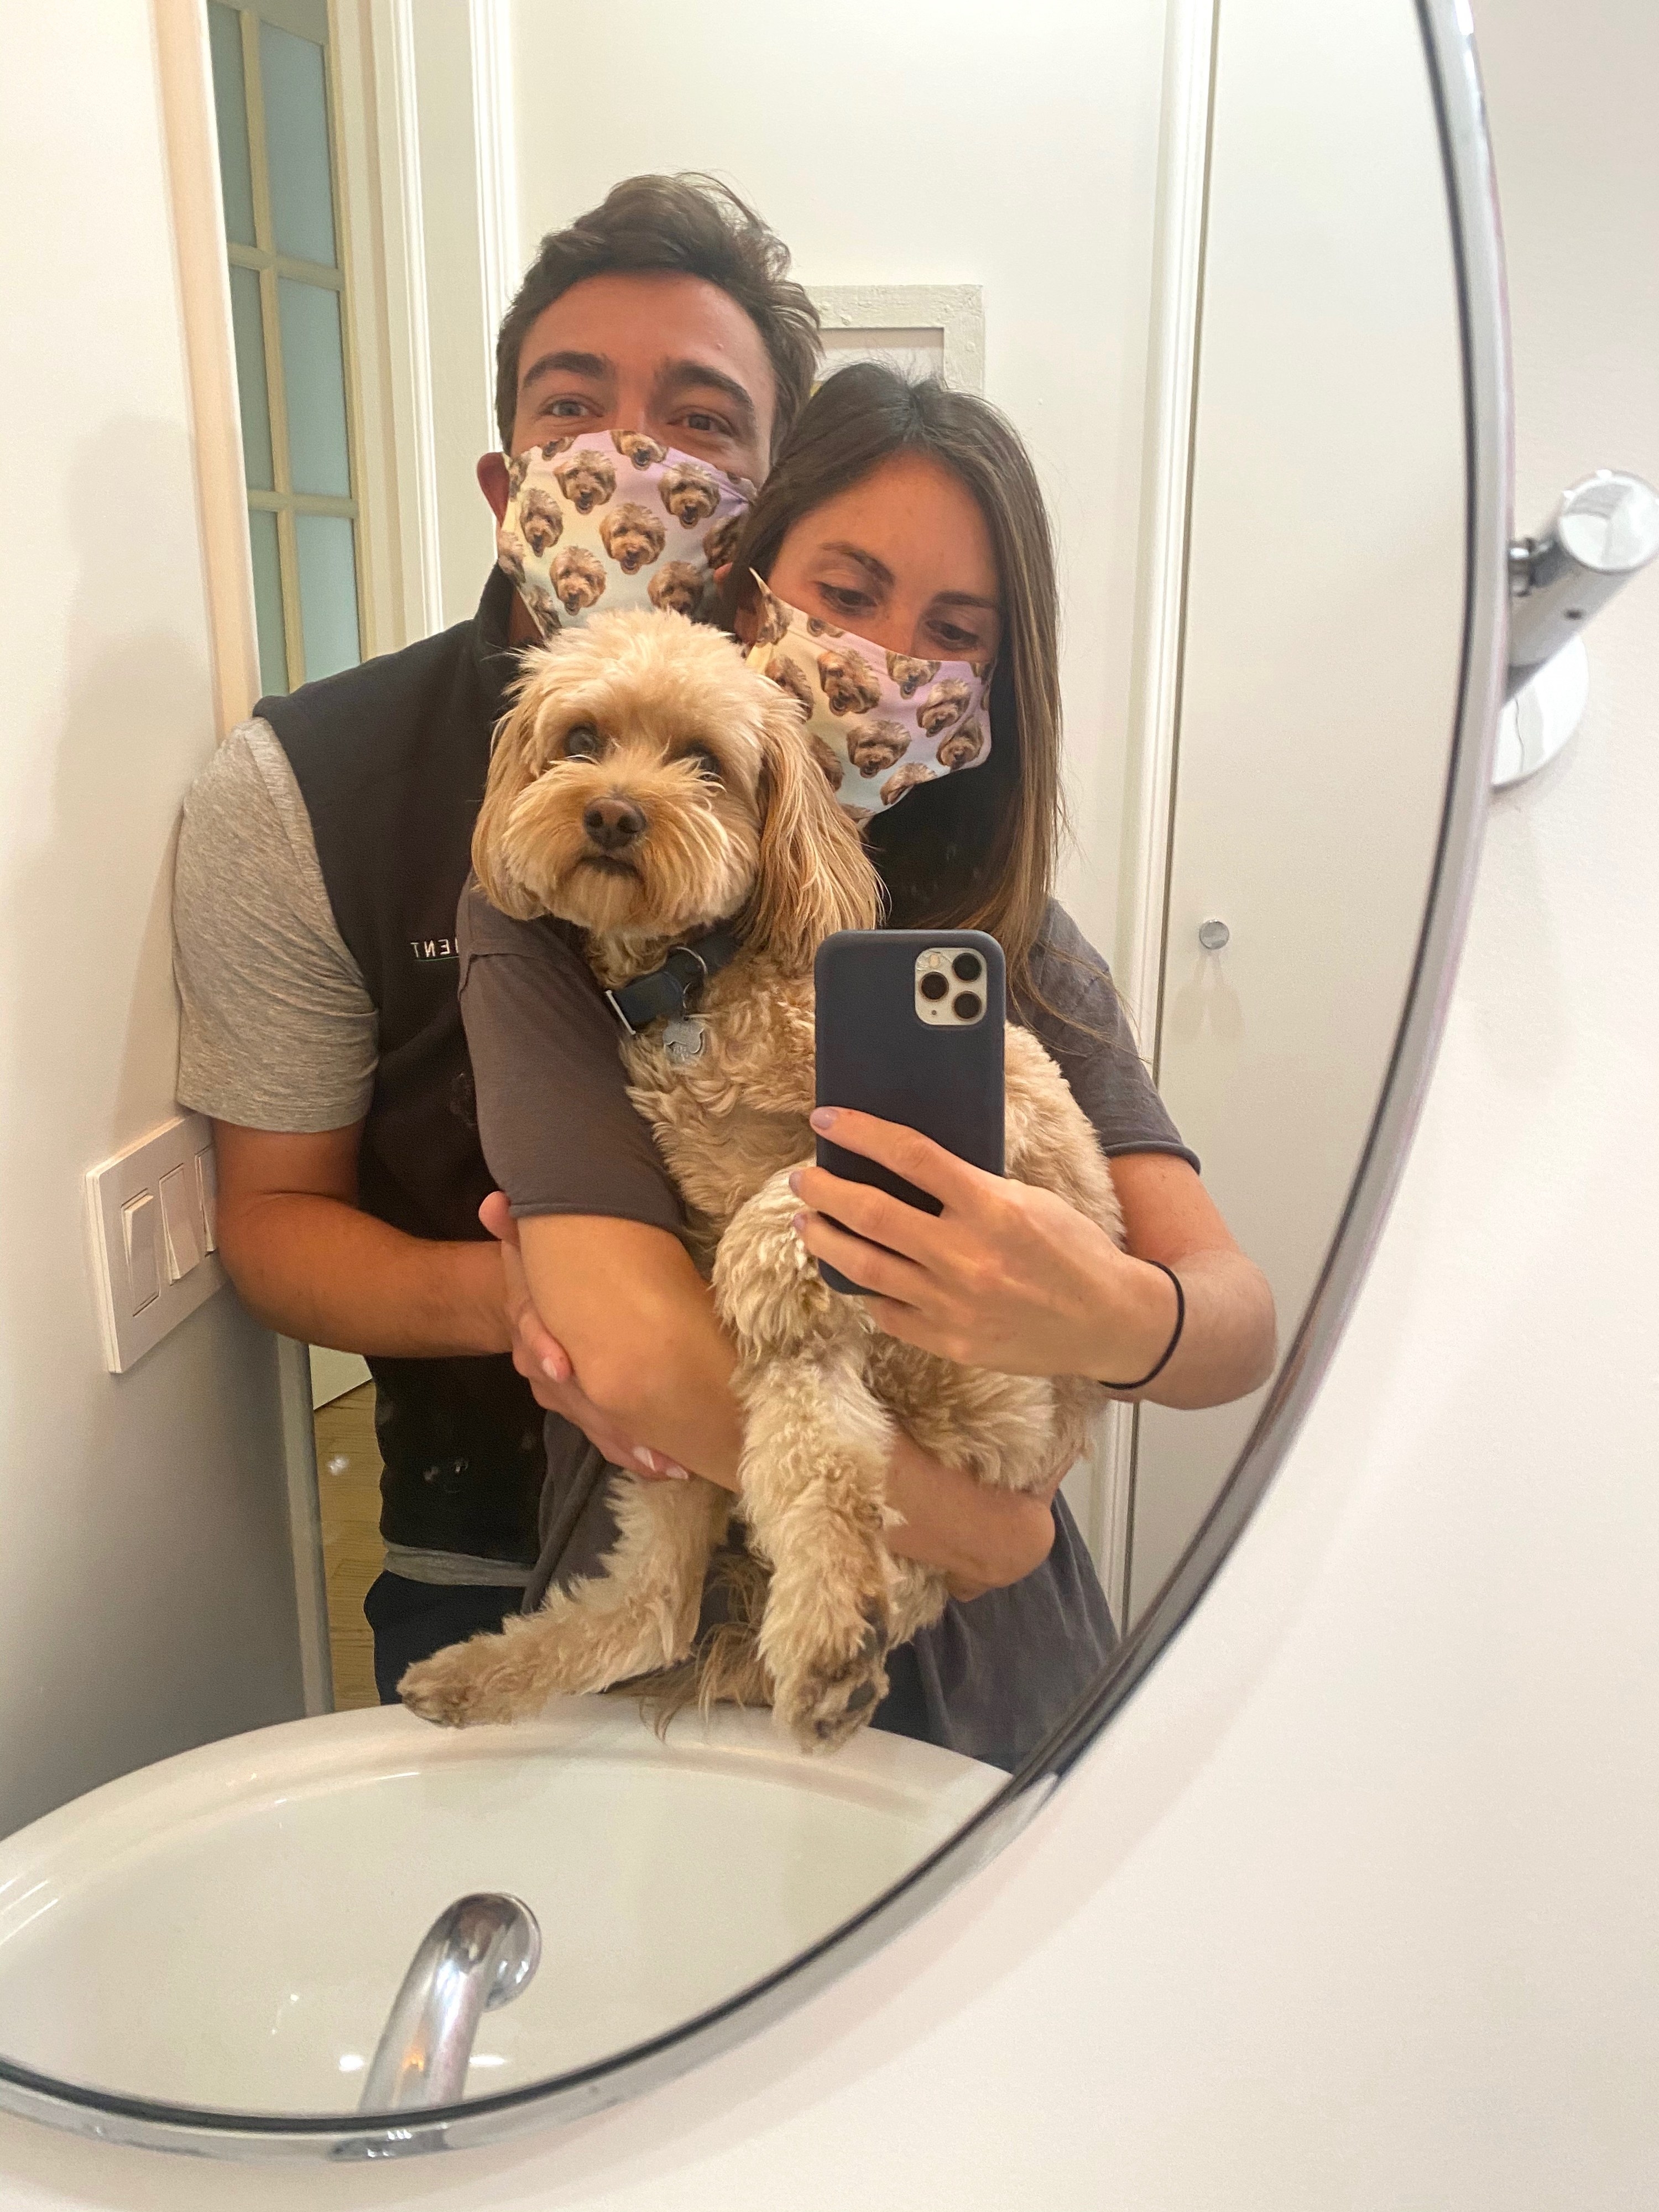 Me, my husband, and our dog posing with our masks in a bathroom mirror.